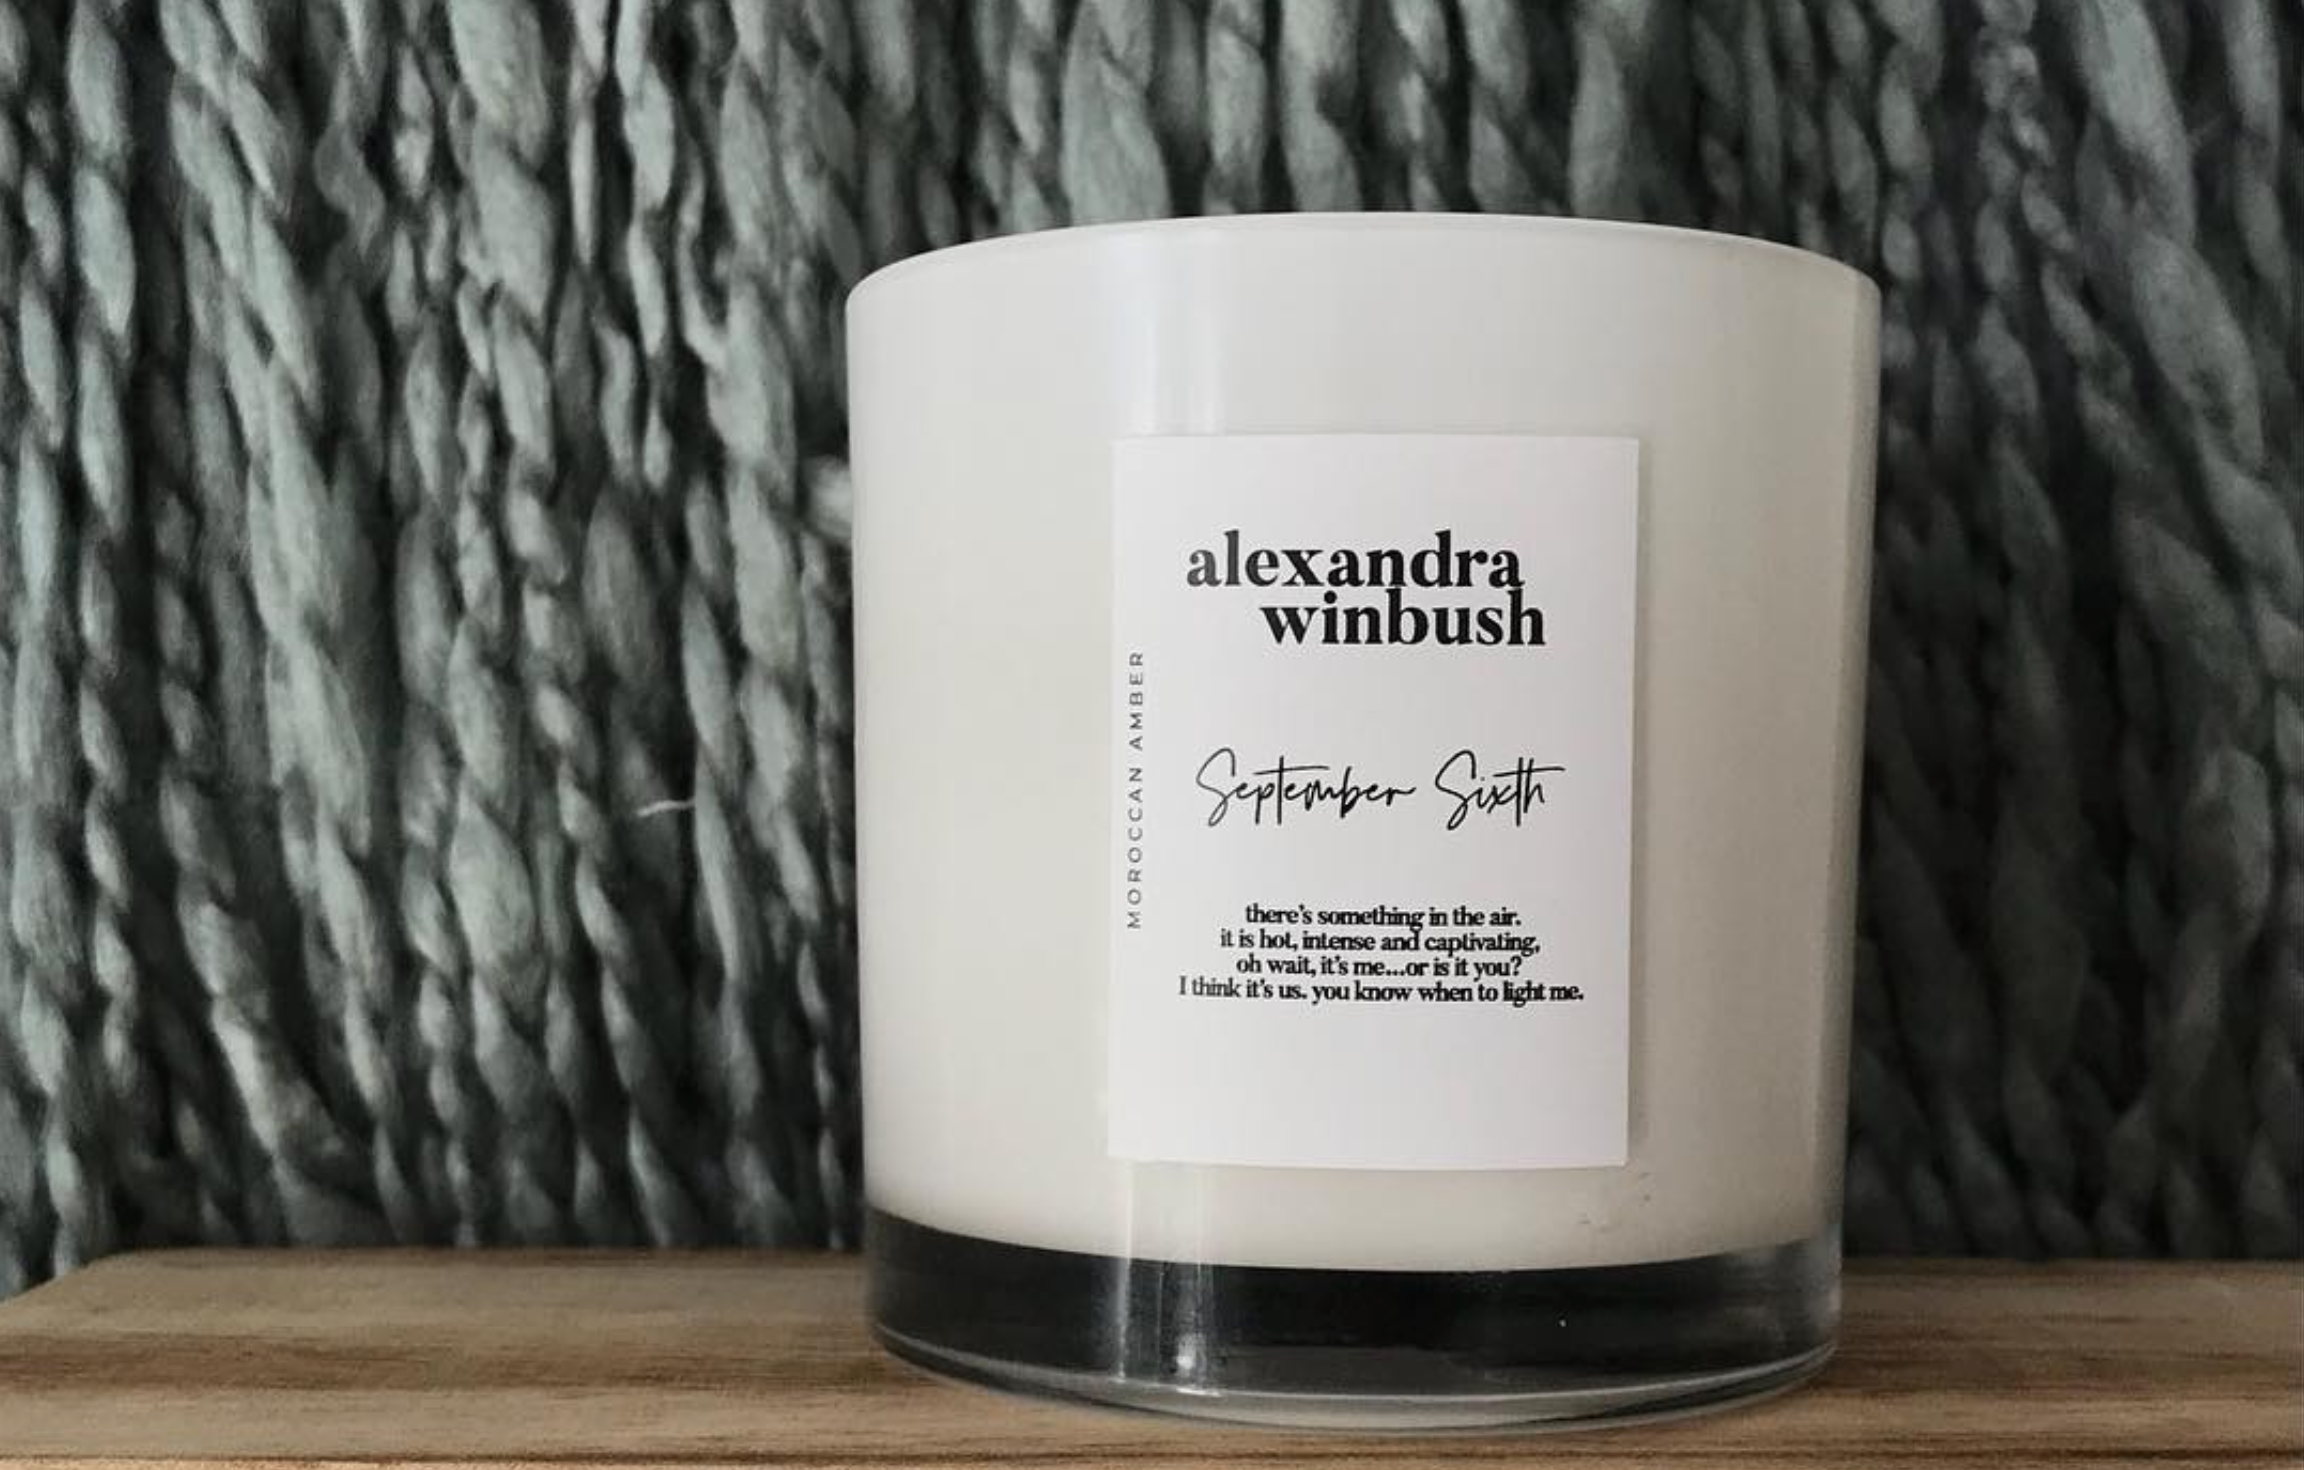 Issa Rae Loves This Black-Owned Candle and Now Twitter Wants To Try It Too